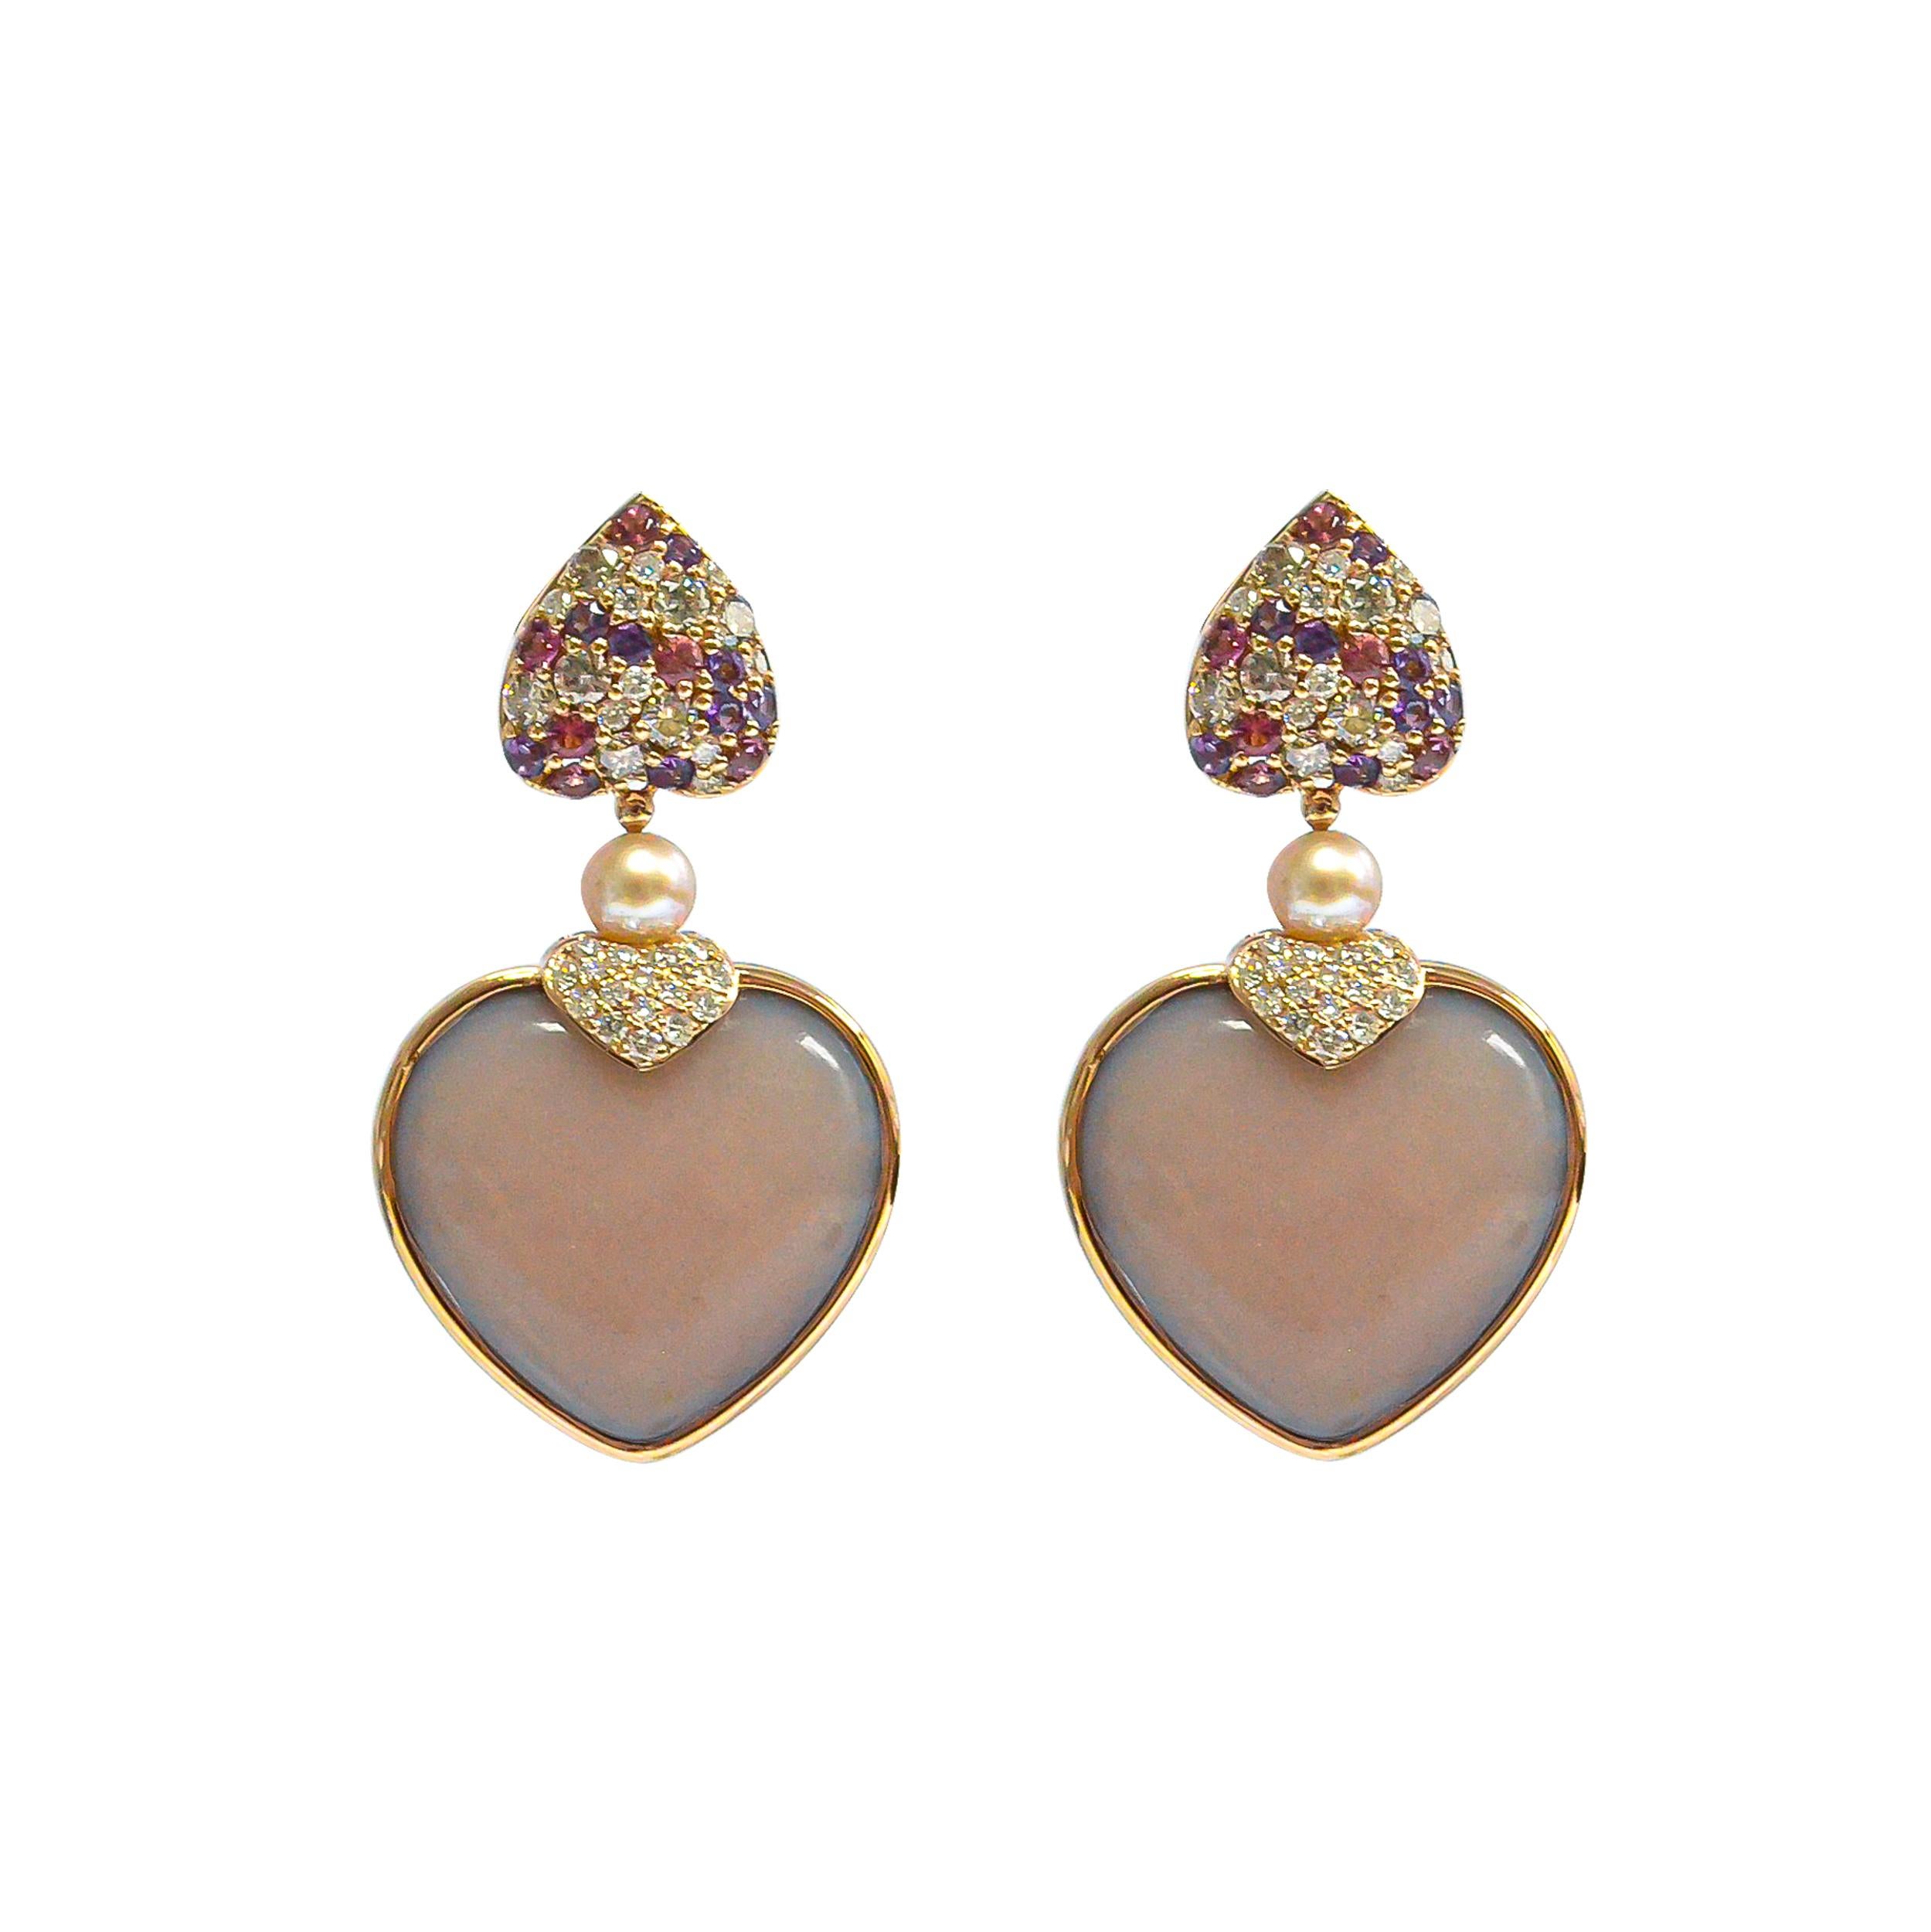 Celebrating the season of love with these cute and dainty heart shaped earrings! The earrings are two-sided and you can easily turn them as your heart desires! Light and easy to wear these earrings showcase beautiful opaque gemstones accented with